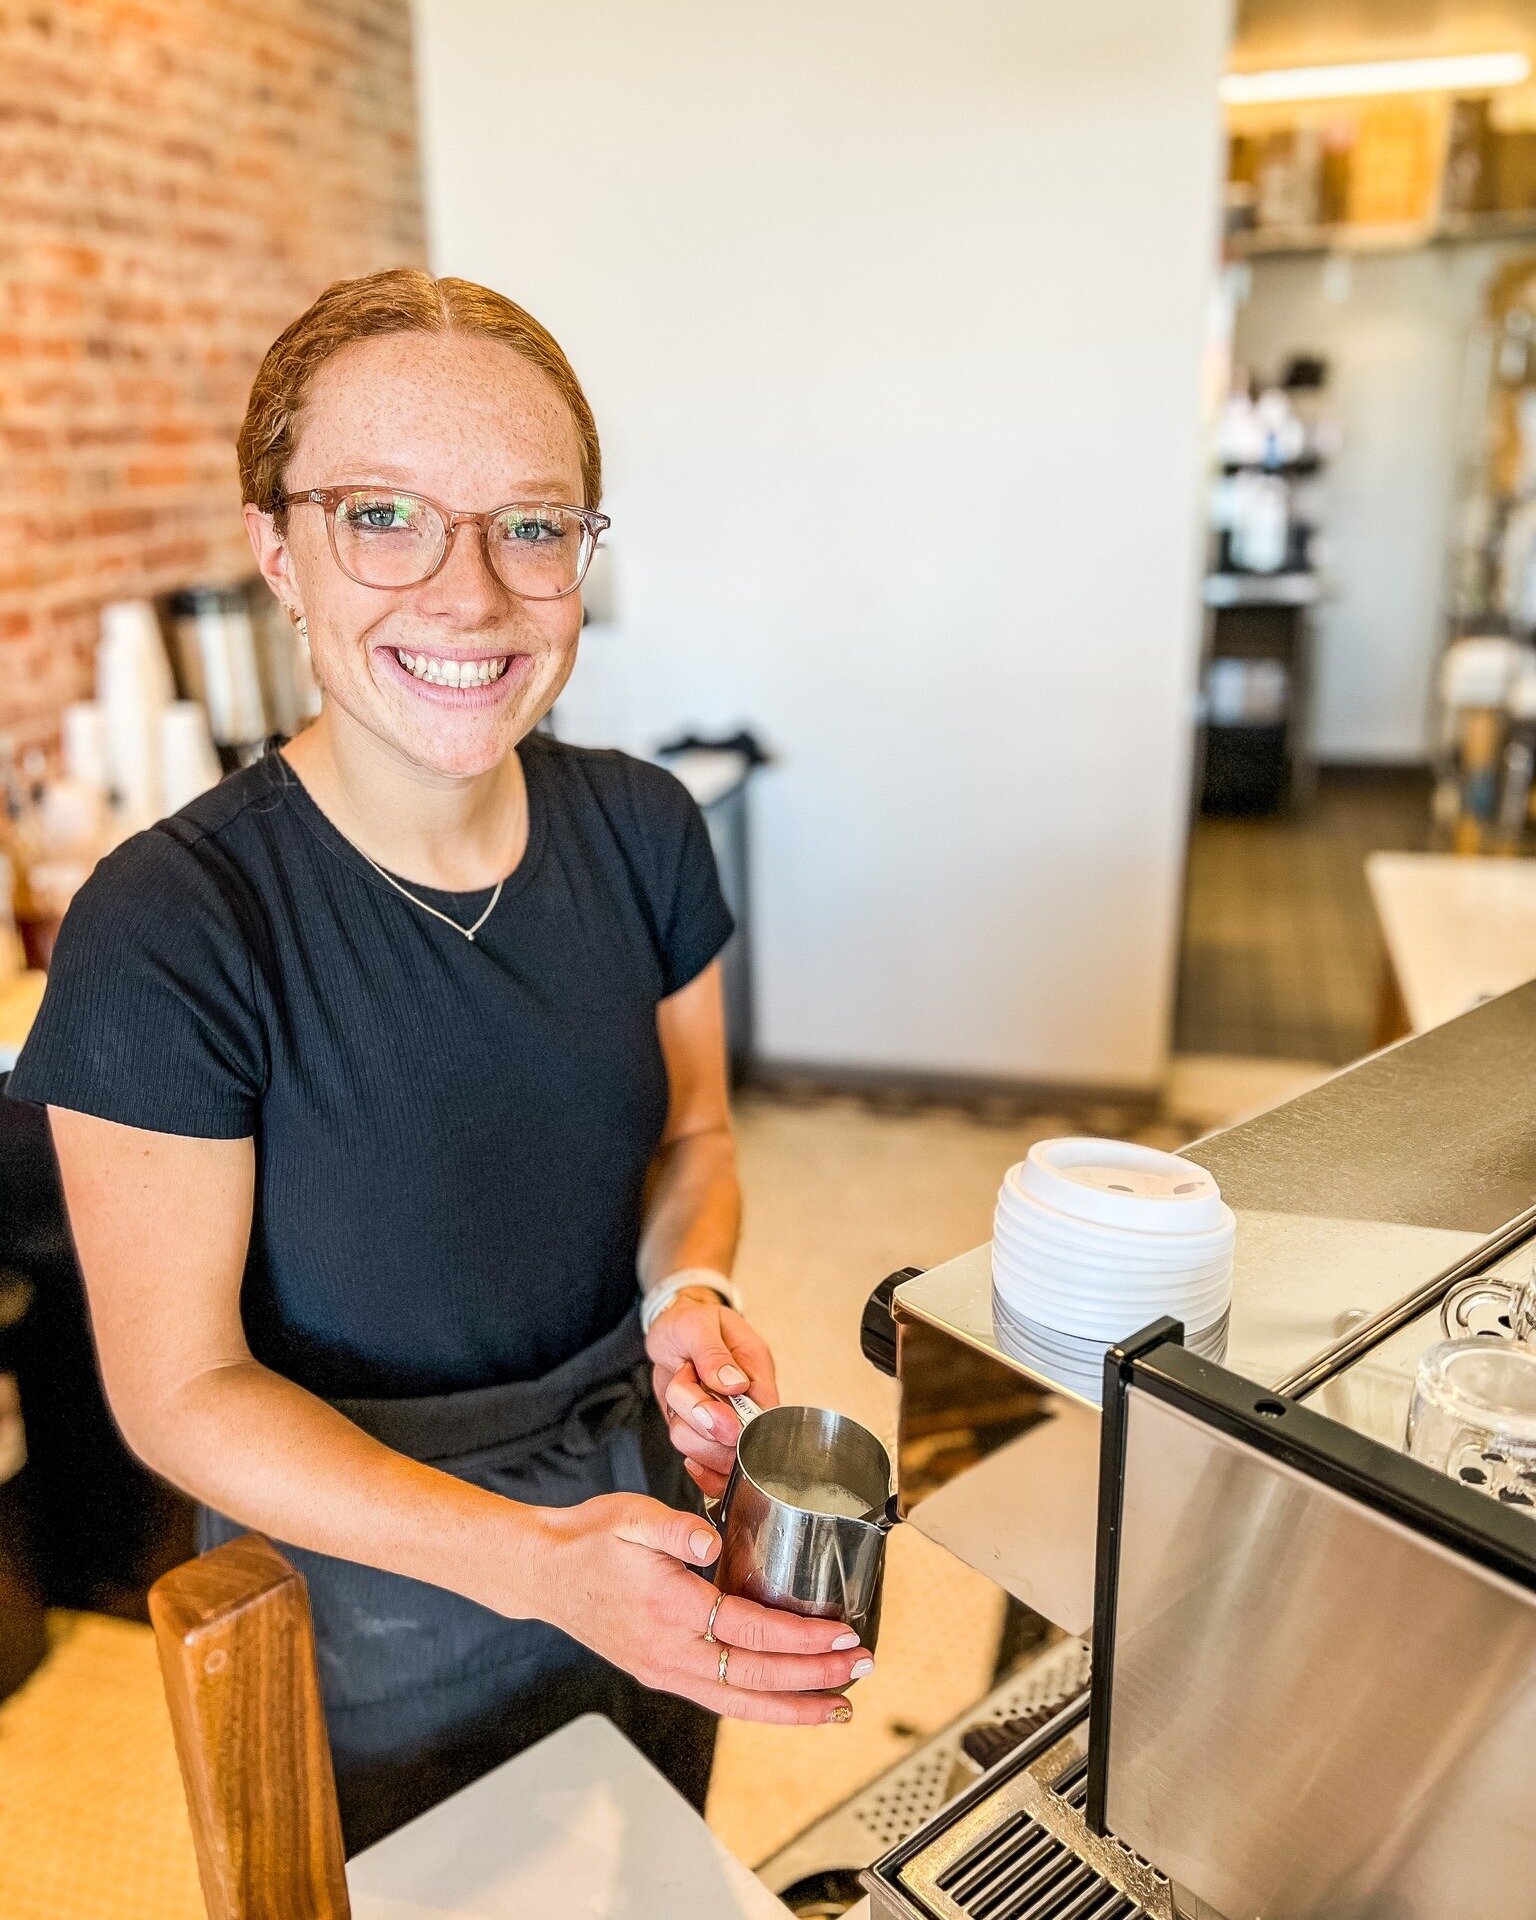 IT'S ELLEN'S BIRTHDAY TODAY! To celebrate, we're offering $1 off her favorite drink all day today! Ellen's favorite drink is our Miel Latte. Grab one today and get a dollar off - and make sure to wish this girl a Happy Birthday!
#waypointcoffeeco